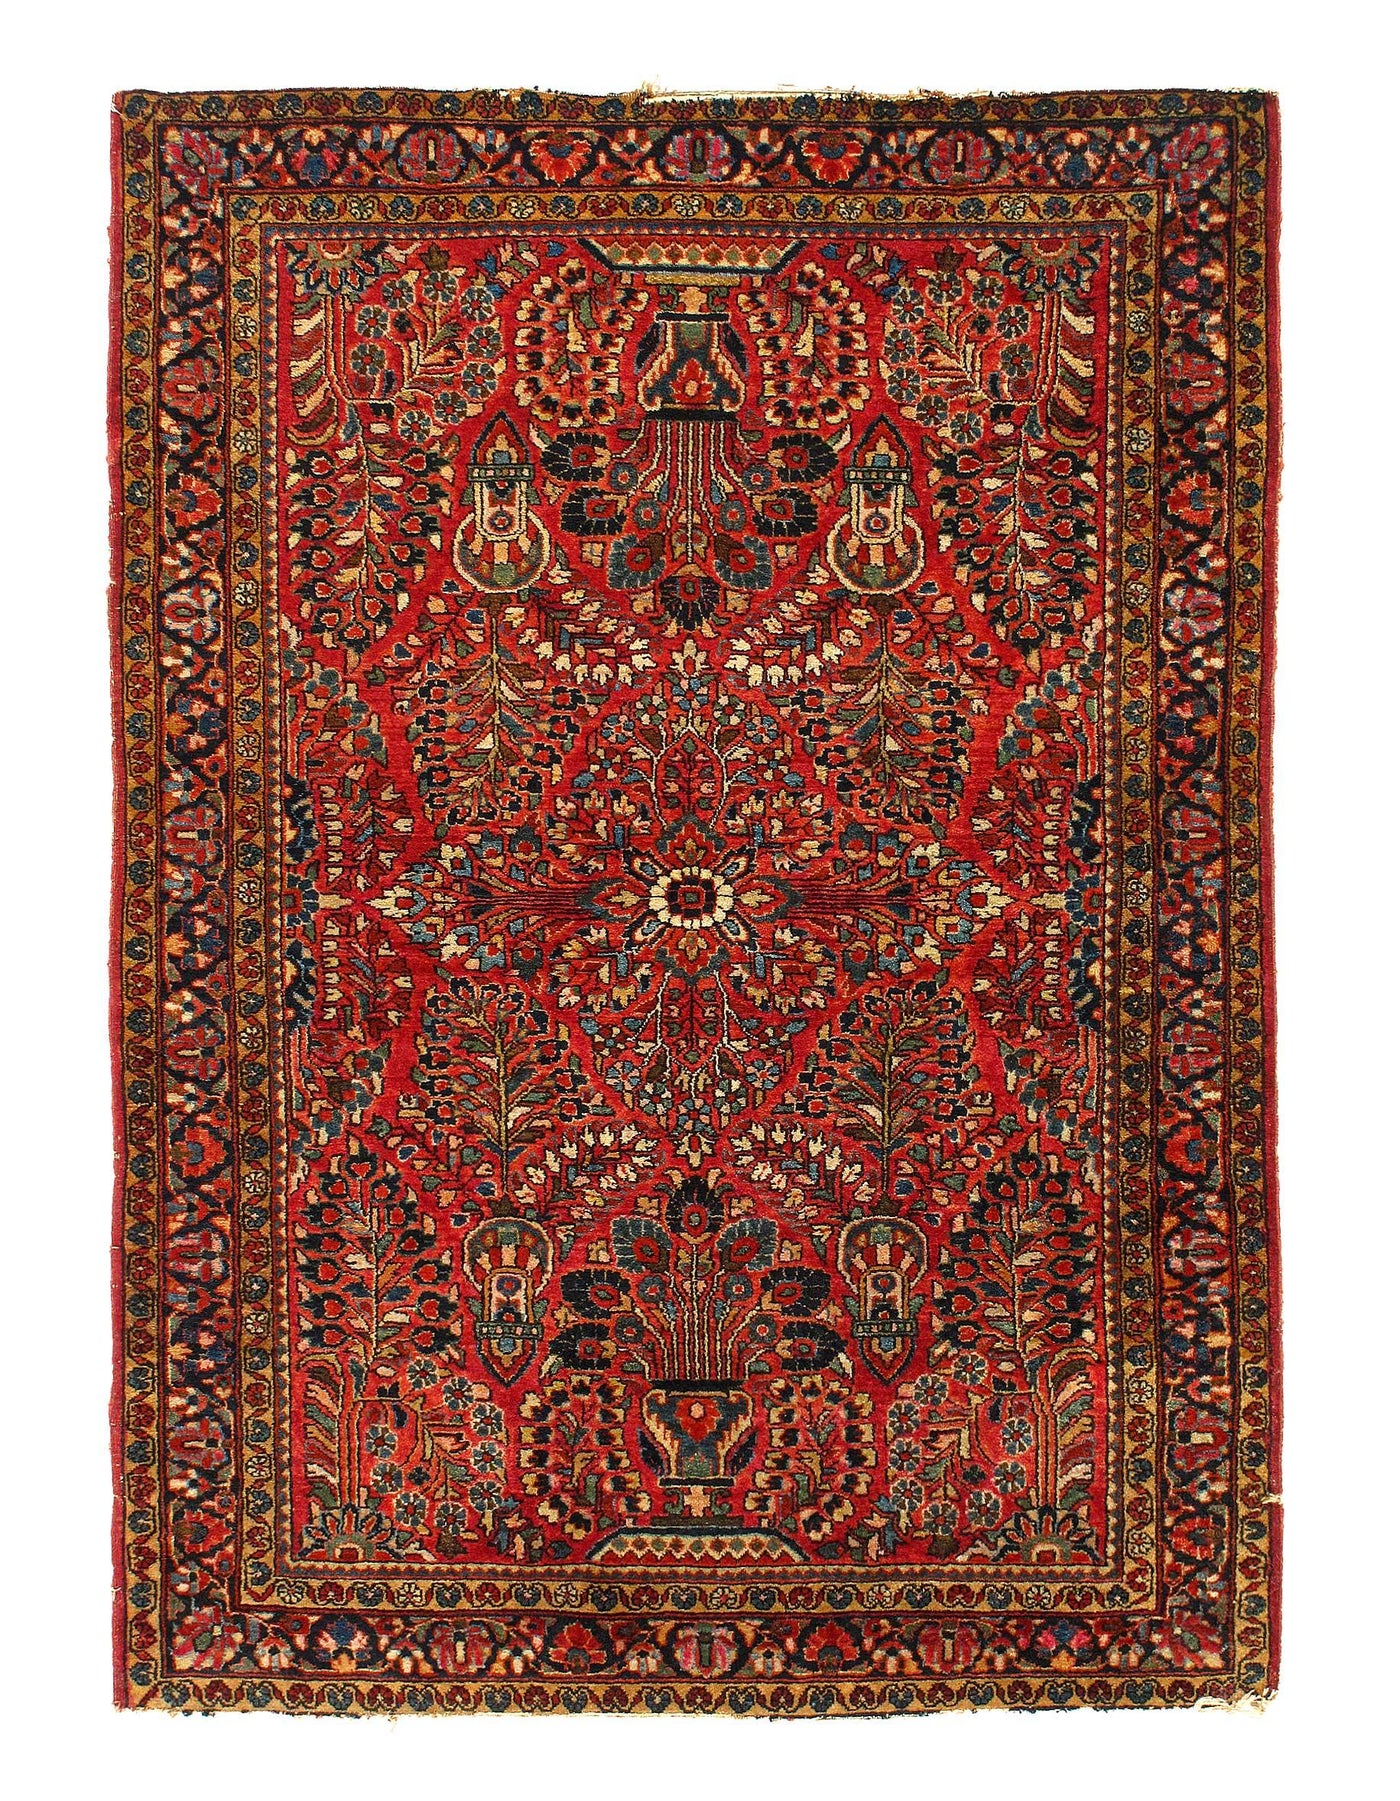 Canvello Antique Sarouk Blue And Red Persian Rug - 3'4'' X 4'9''